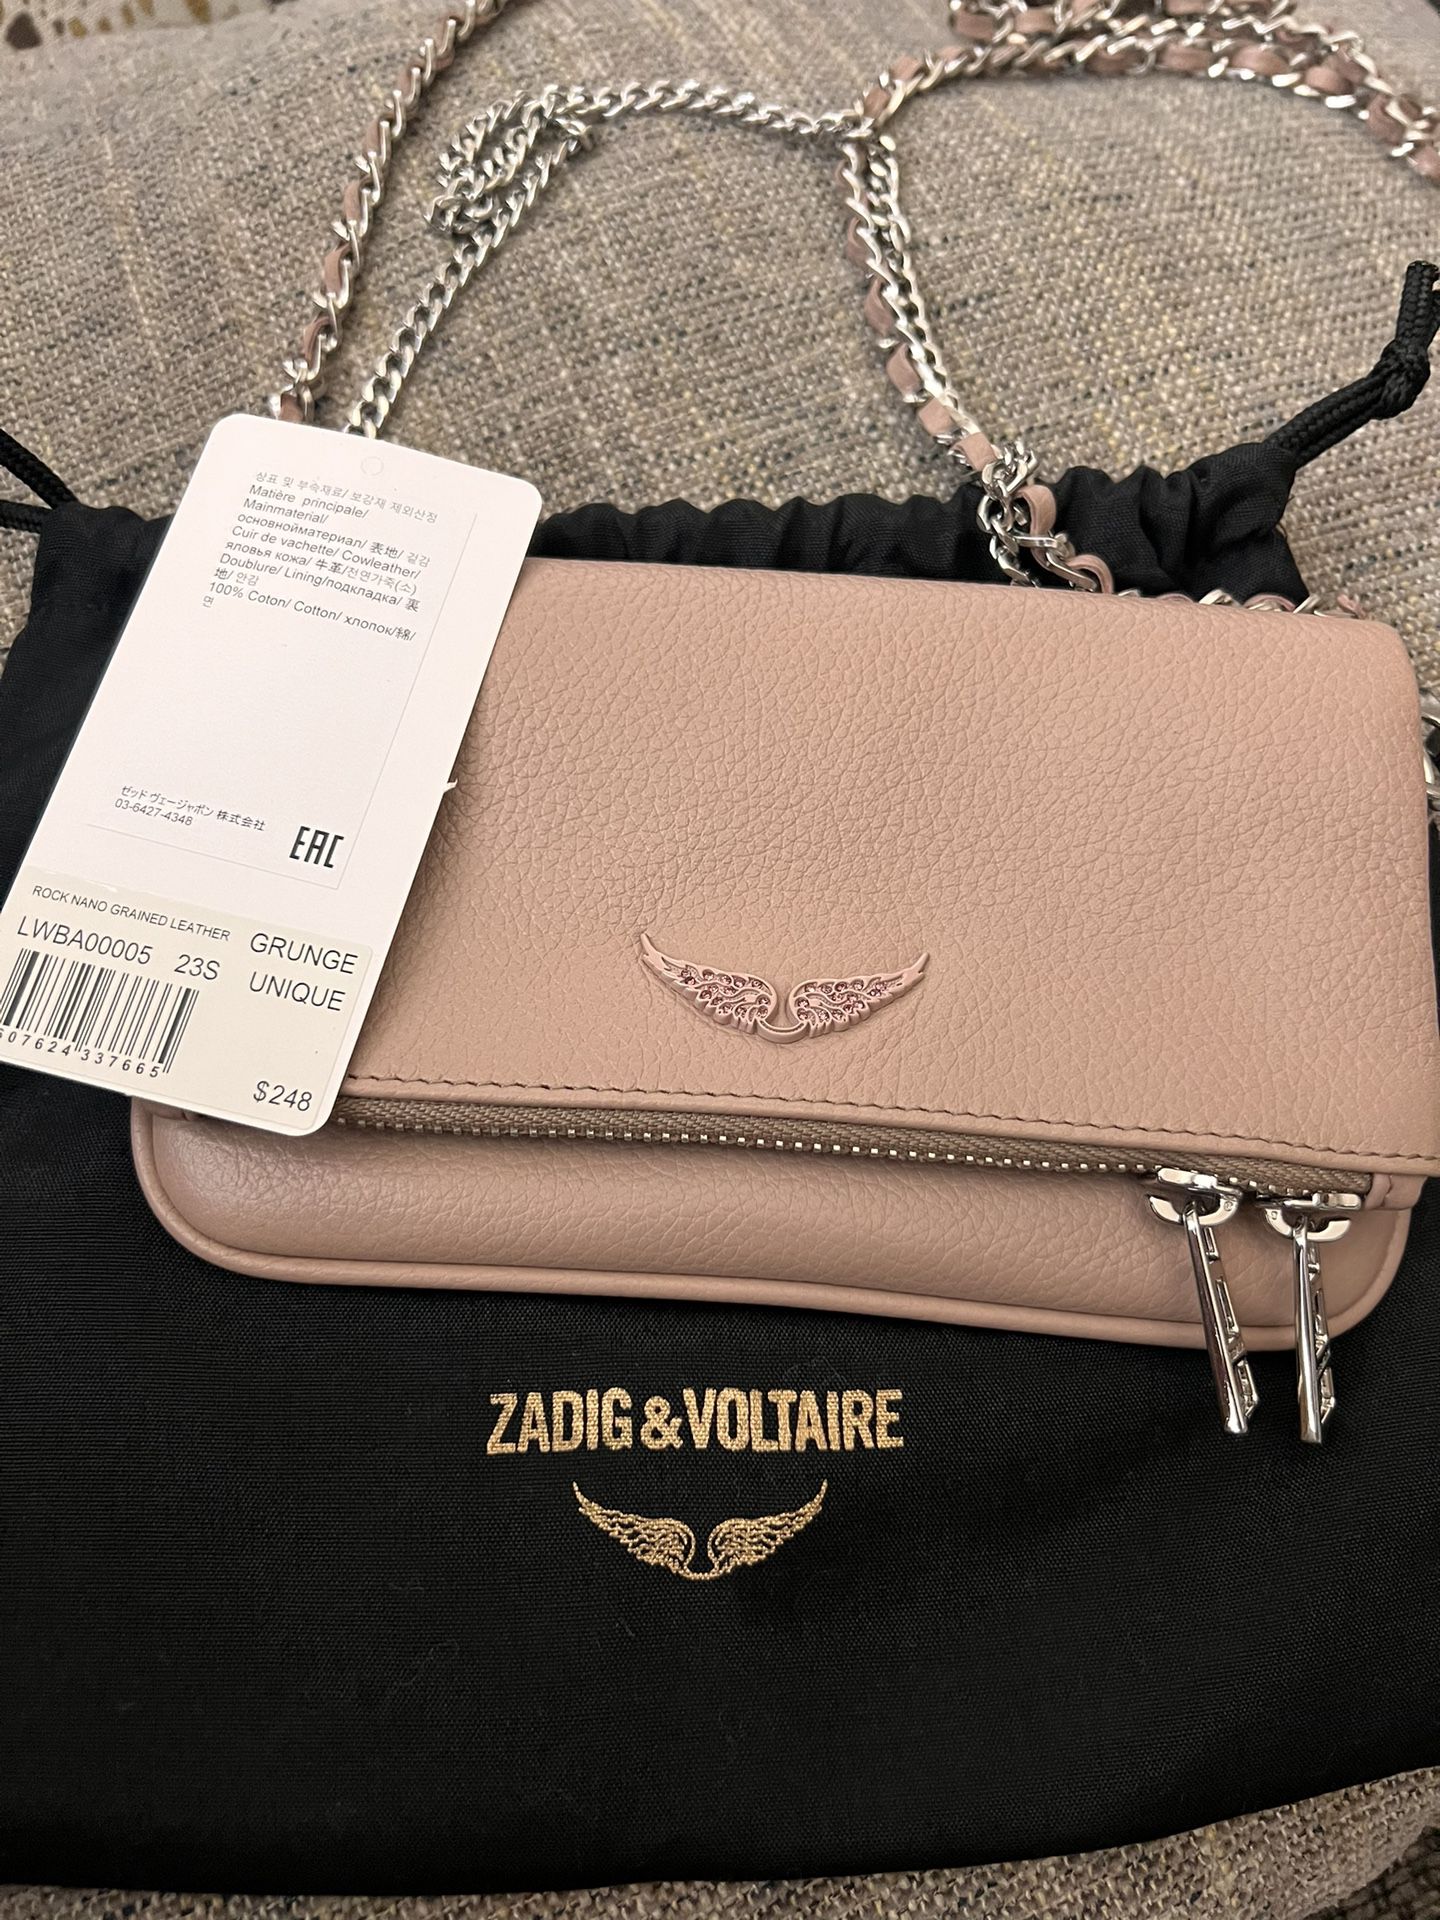 original zadig & voltaire bag for Sale in Lincoln Acres, CA - OfferUp